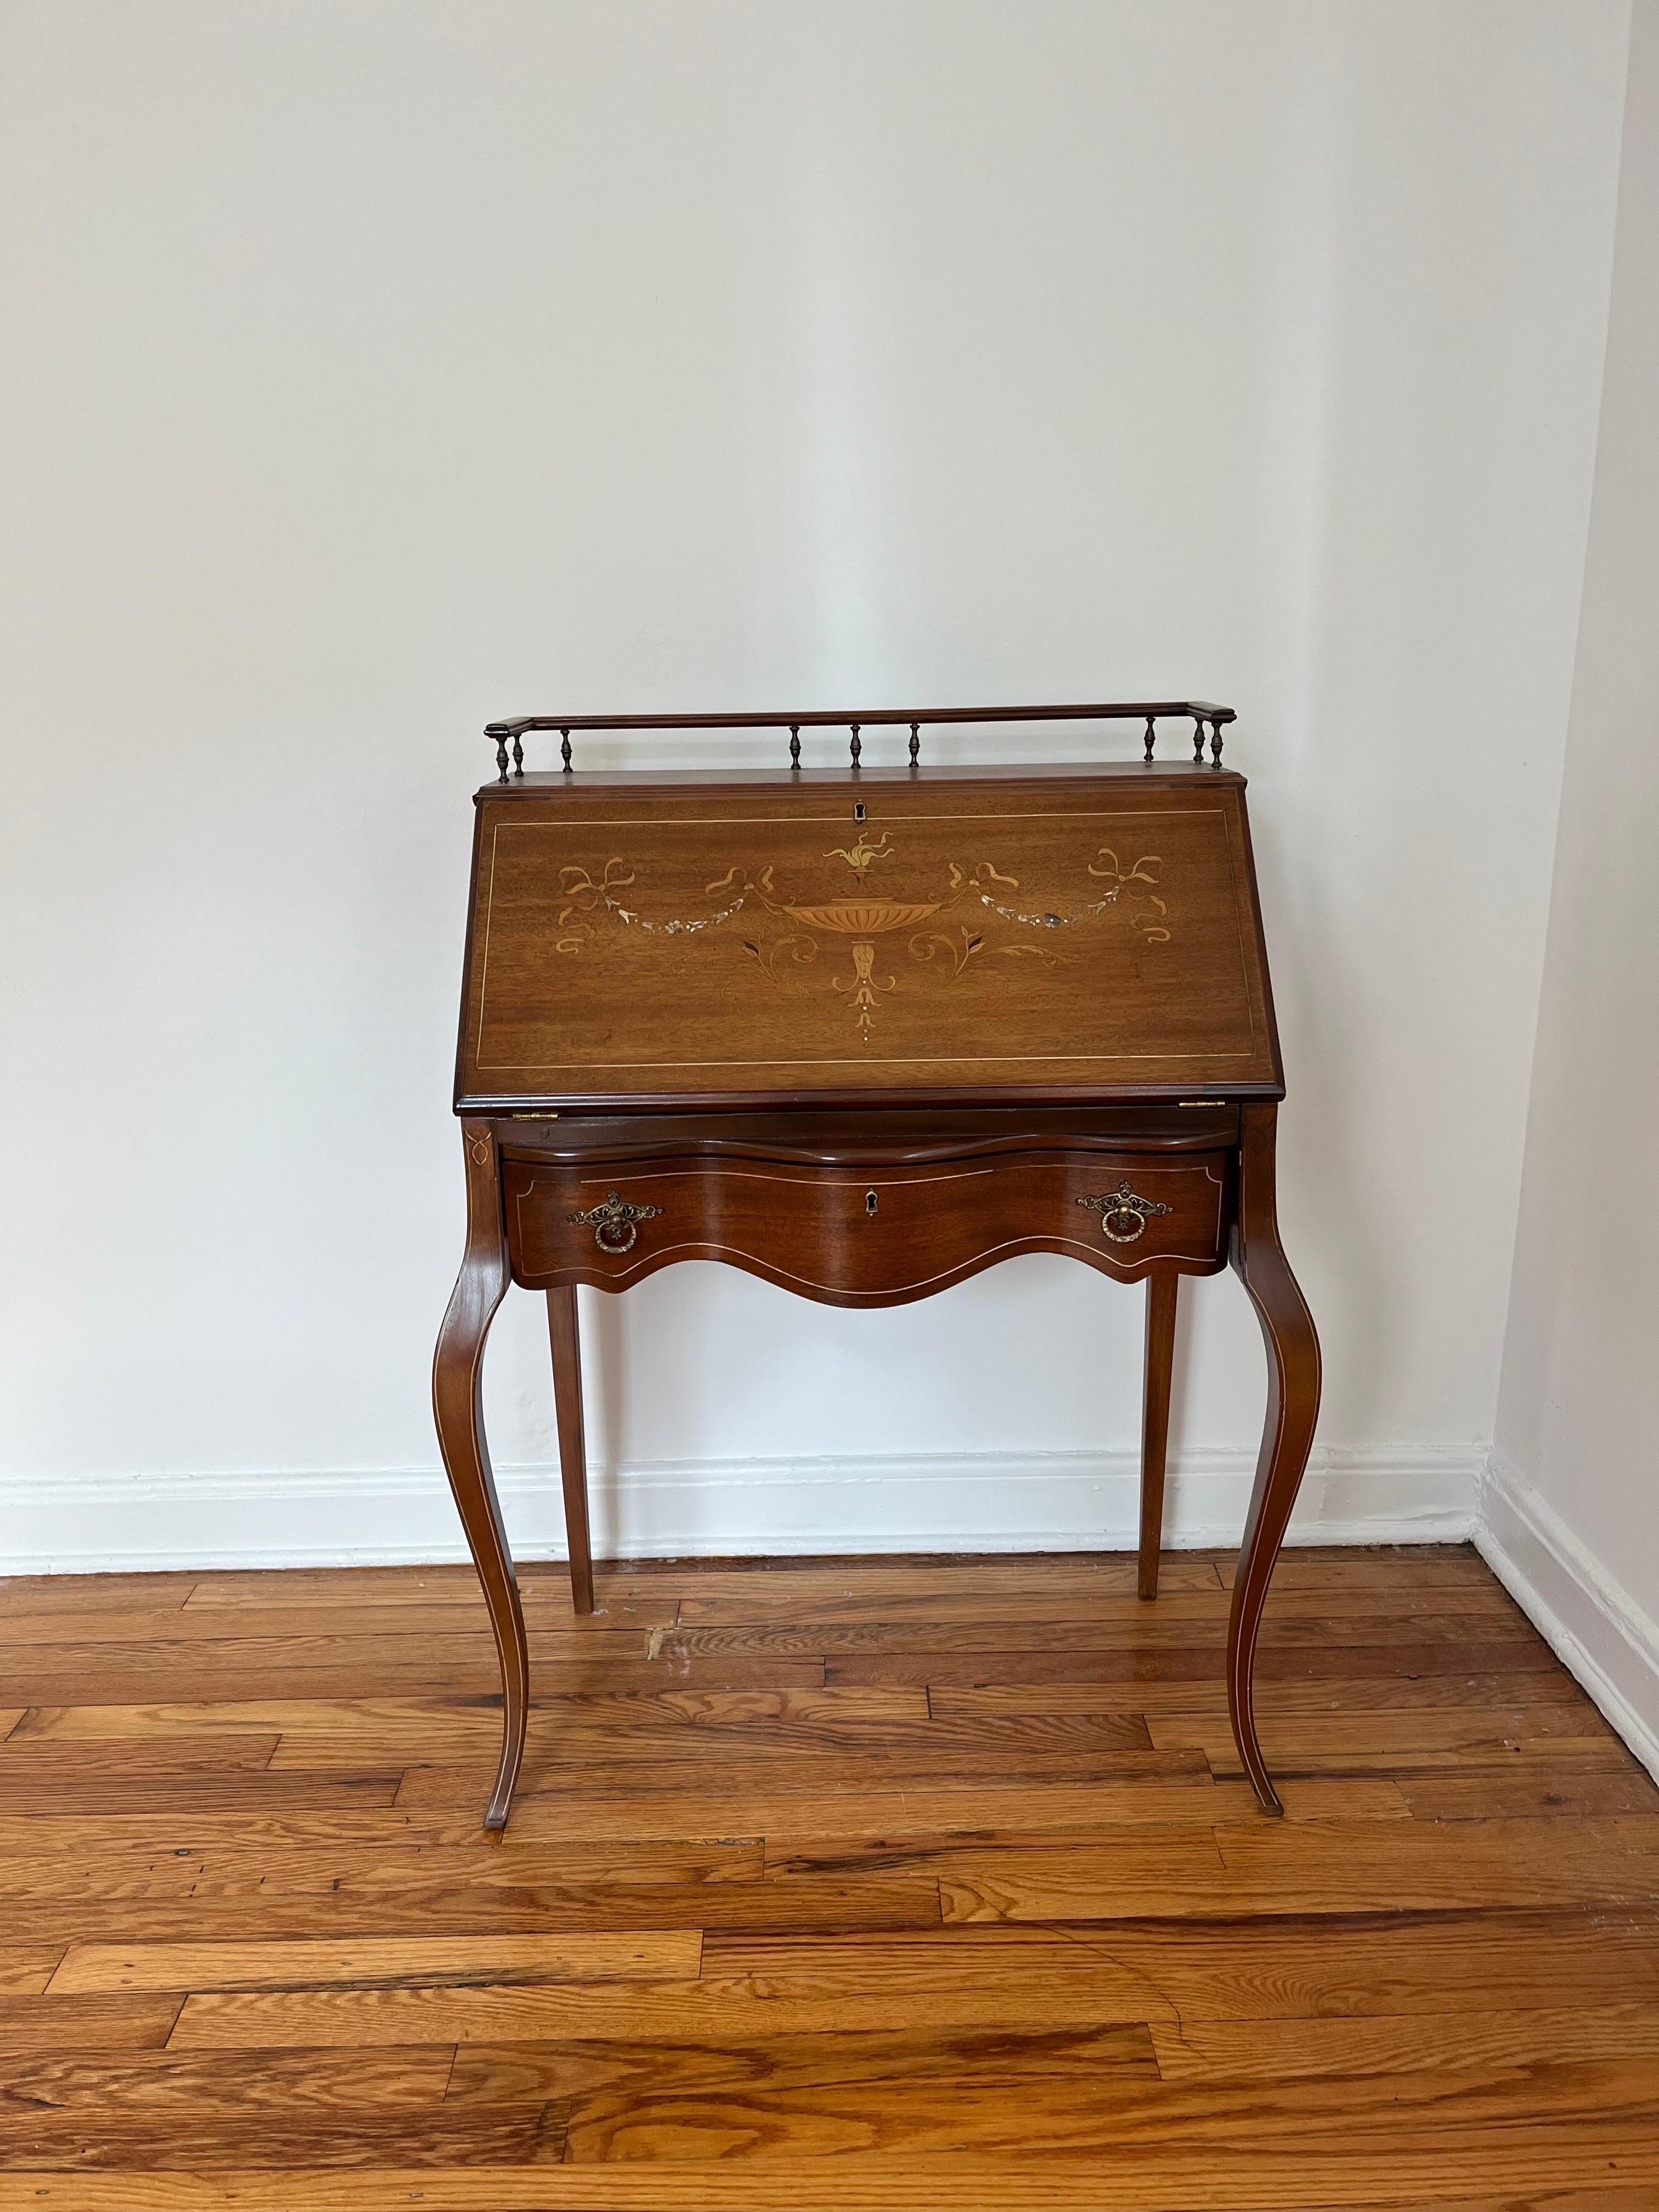 Early 20th C. Lady's Desk. Mahogany. Slant Lid Embellished With Mother-Of-Pearl And Colored Wood Inlay In Foliate Design.
Curbside to NYC/Philly $300